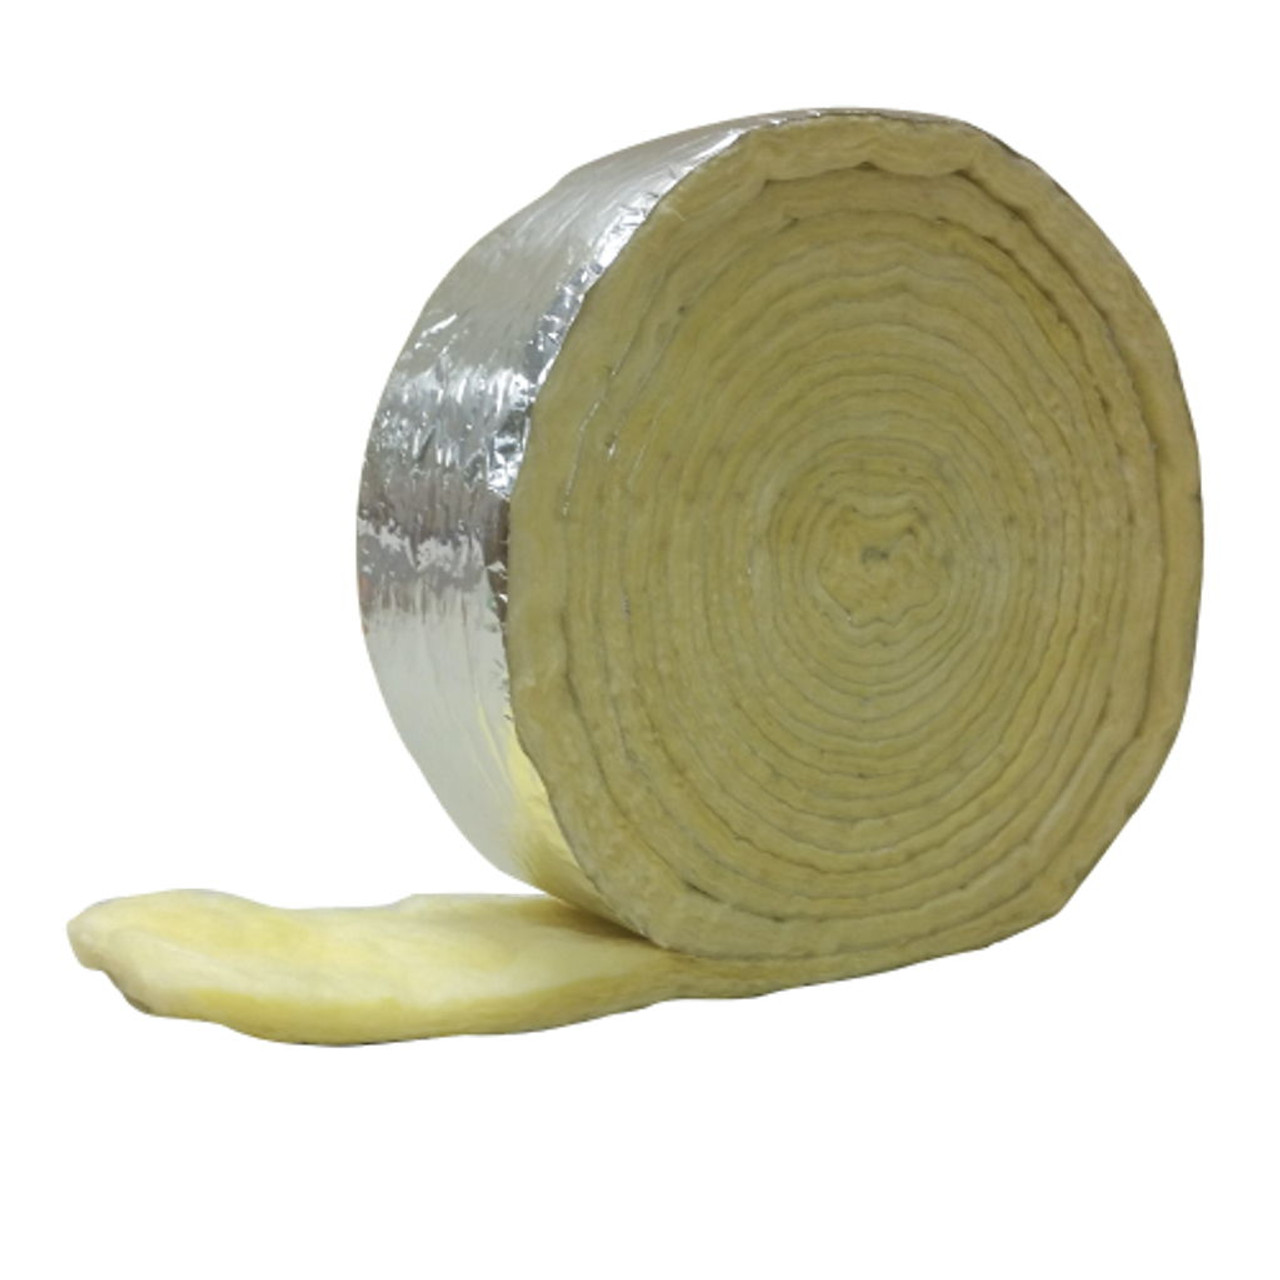 Frost King Foil Backed Fiberglass Pipe Wrap Insulation